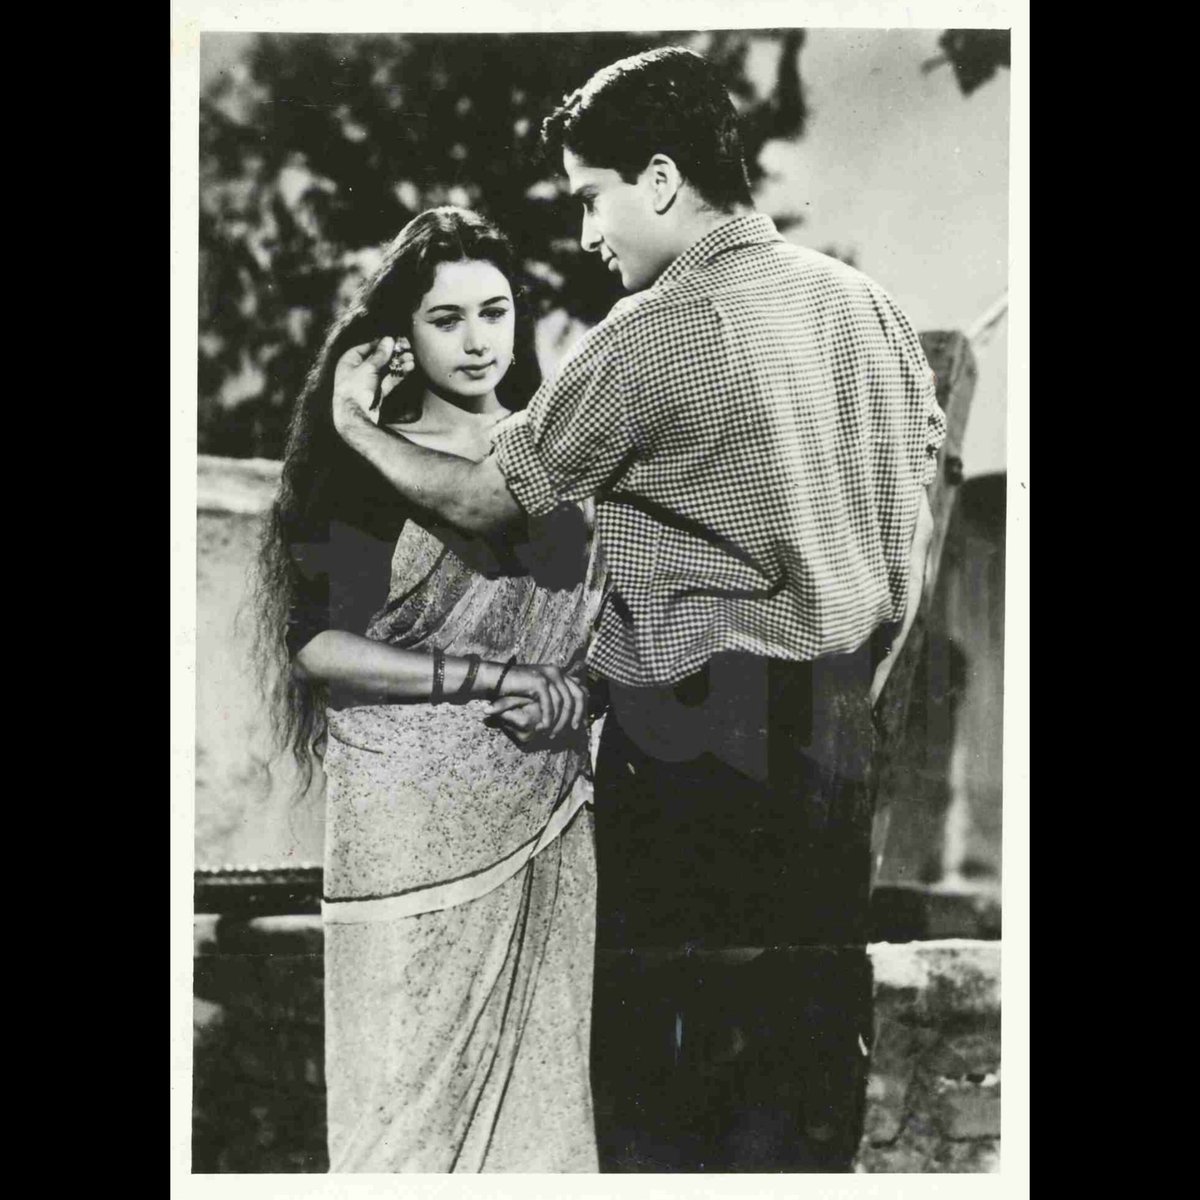 Nanda and Shashi Kapoor appear in an intense moment in the film Char Diwari (1961) directed by Krishna Chopra. The soundtrack was composed by Salil Choudhury with lyrics by Shailendra with hit songs including 'Kaise Manaoon Piawa' and 'Jhuk Jhuk Jhuk Jhum Ghata'.